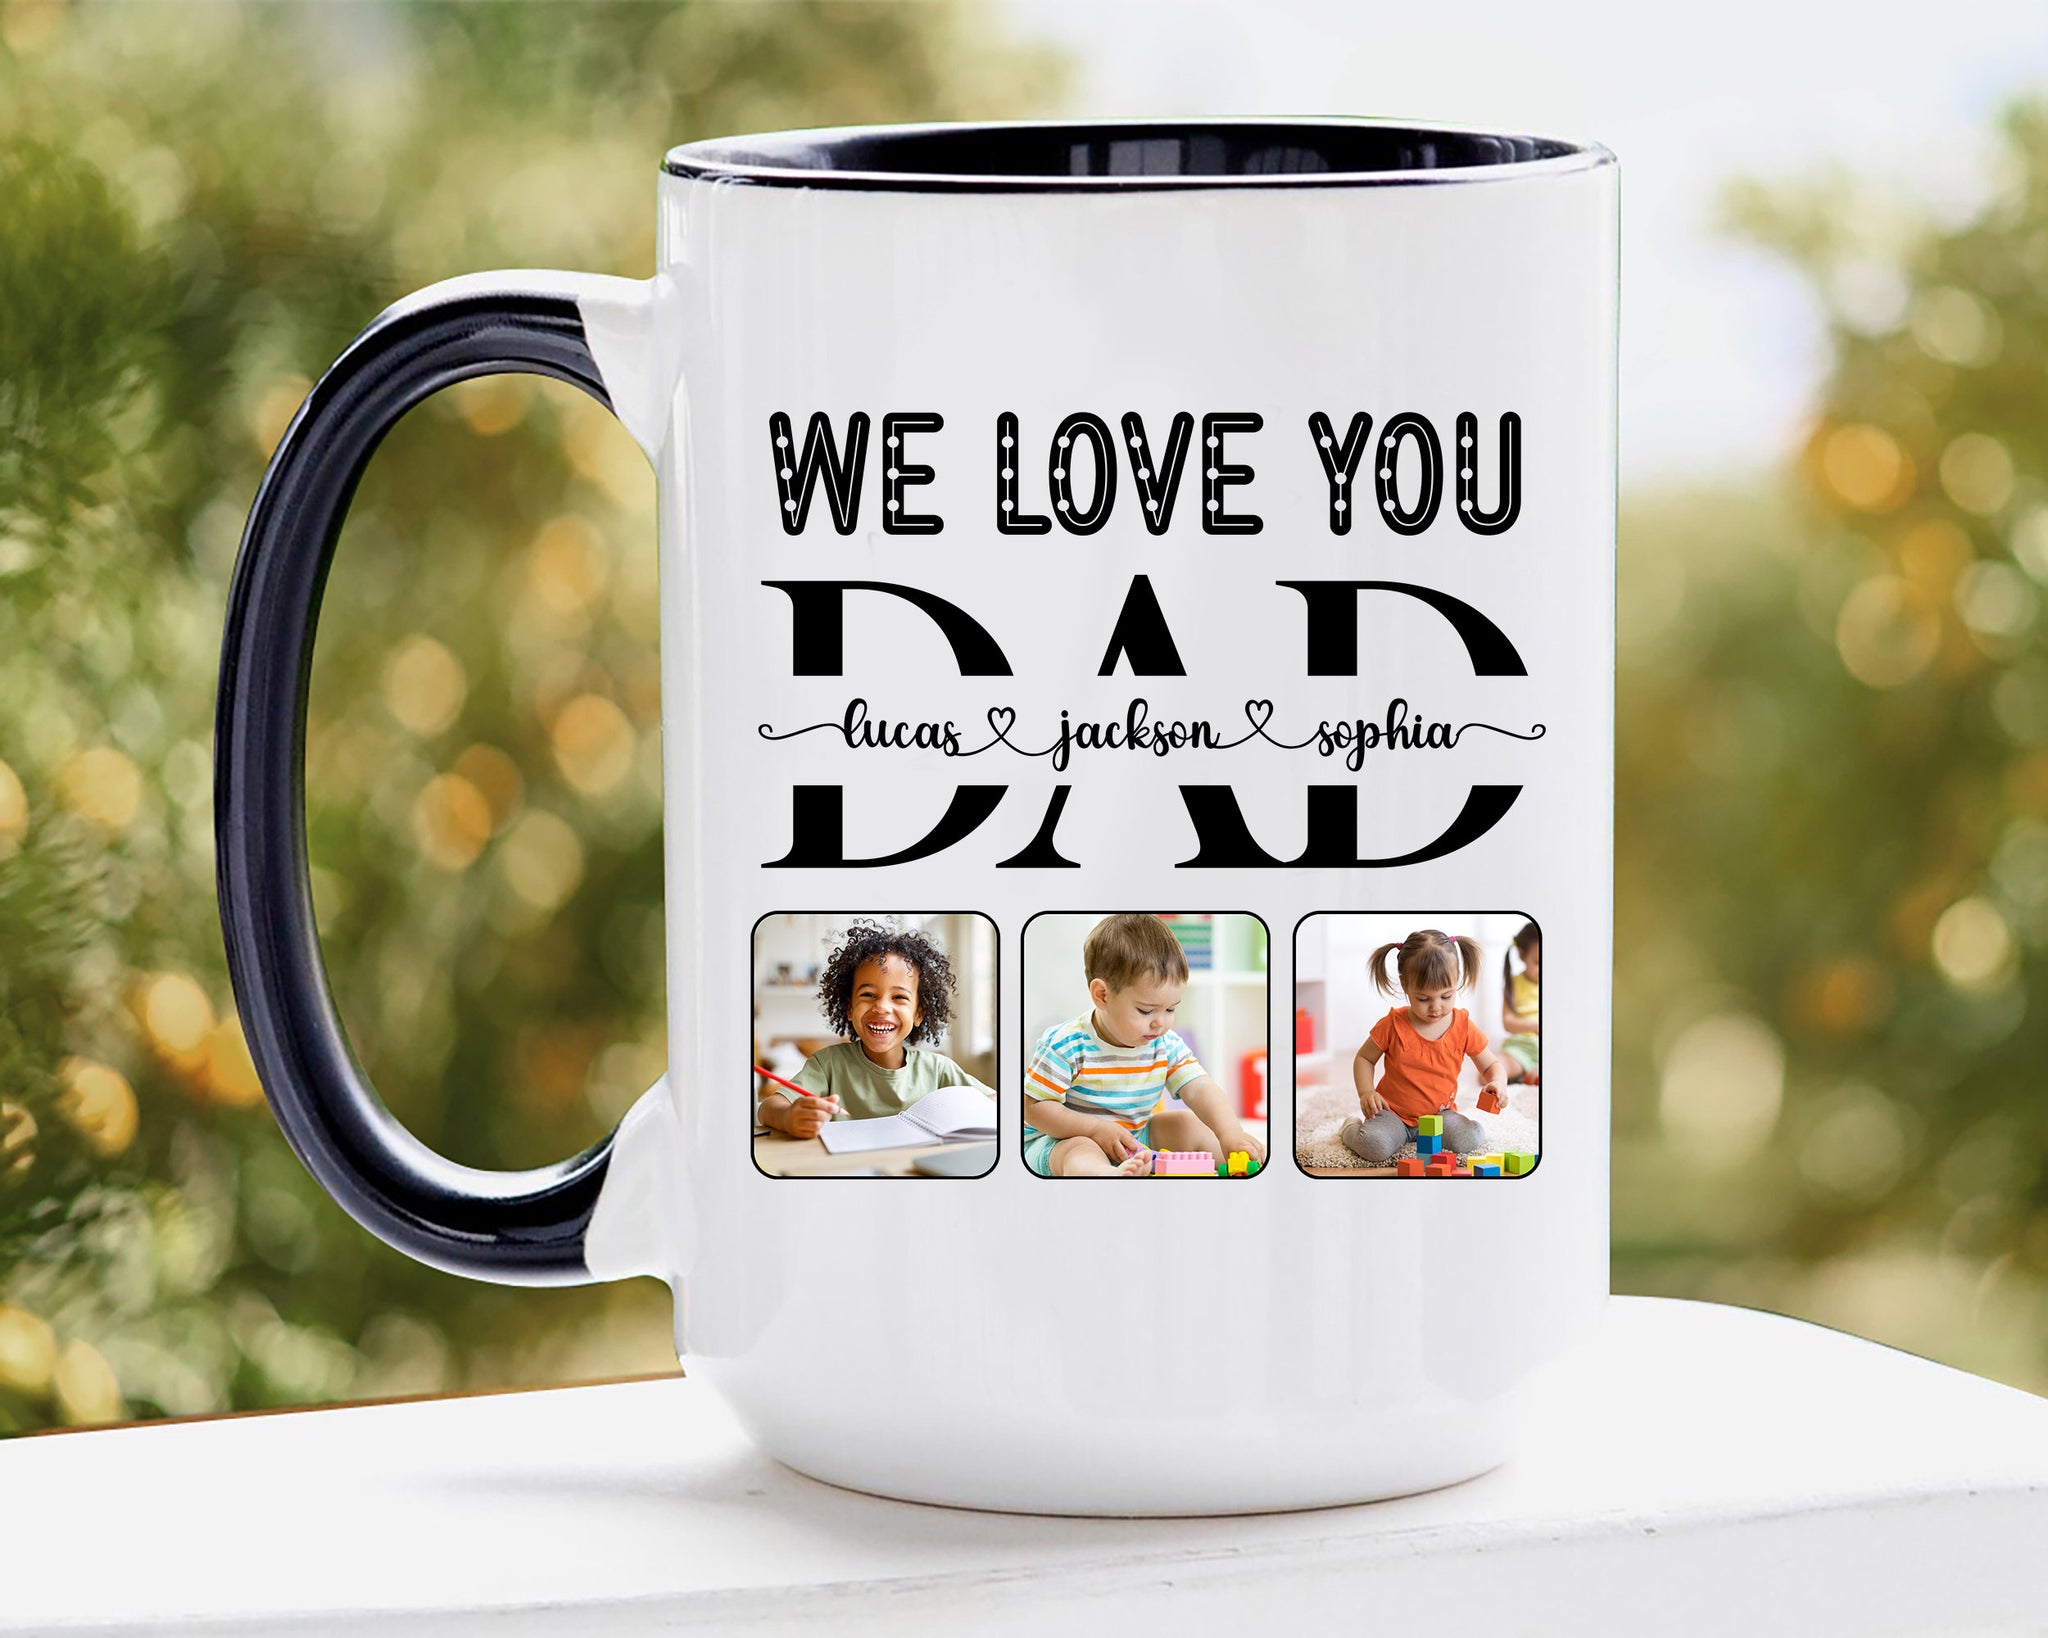 Personalized Dad Mug, Mug with Photo, Custom Kid's Photo Coffee Mug, Custom Photo Dad & Child Coffee Cup, Gift for Dad, Father's Day Gift